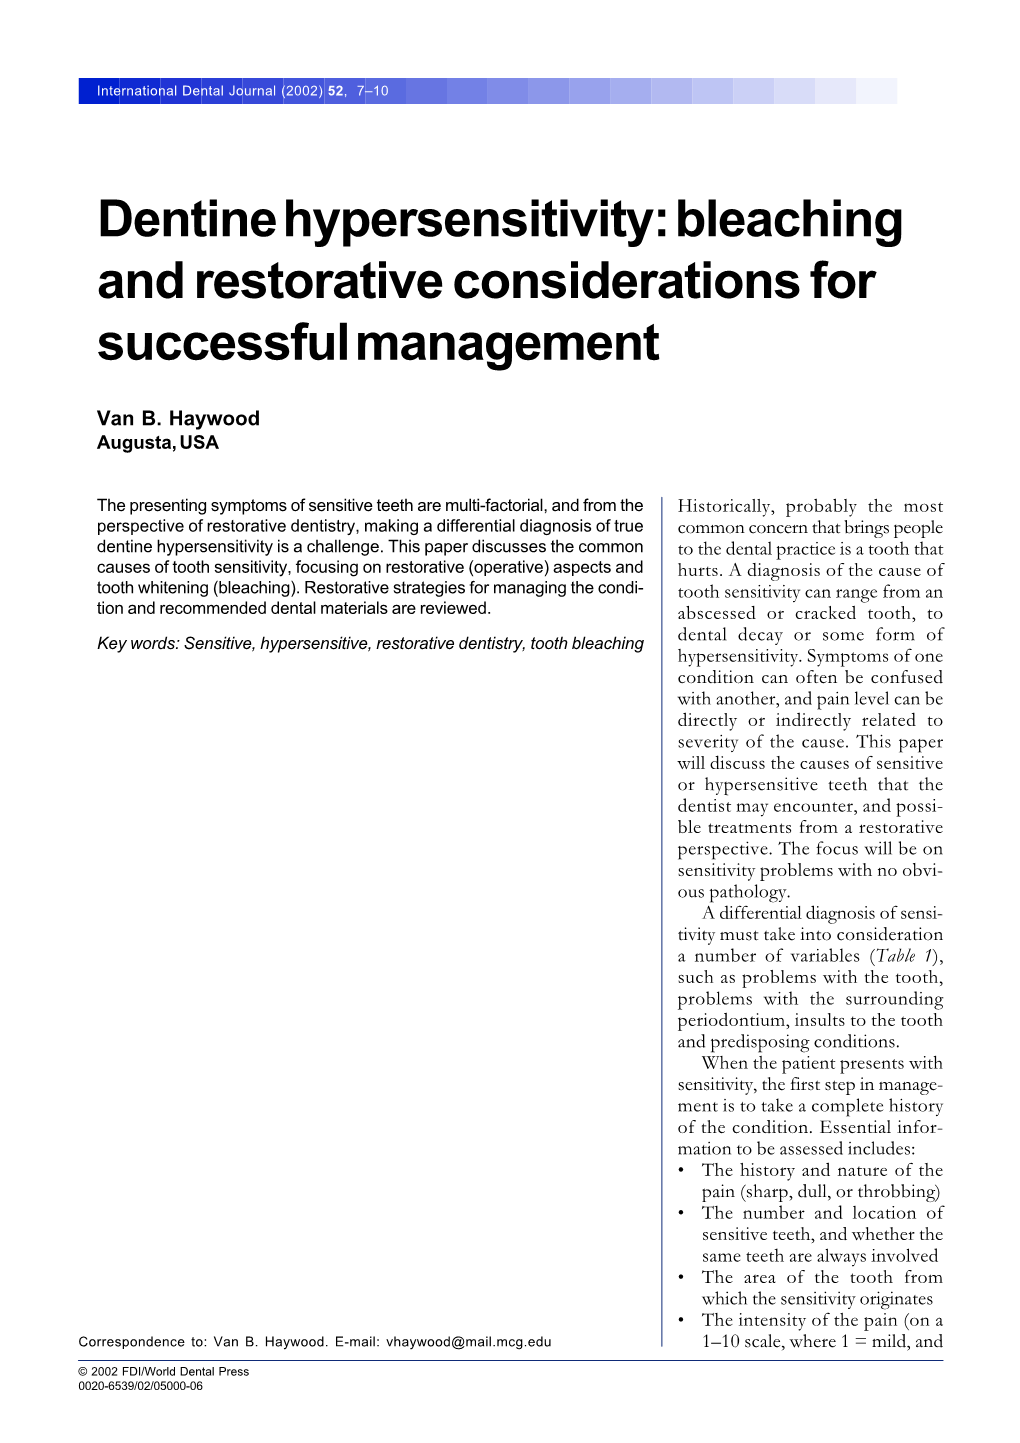 Dentine Hypersensitivity: Bleaching and Restorative Considerations for Successful Management